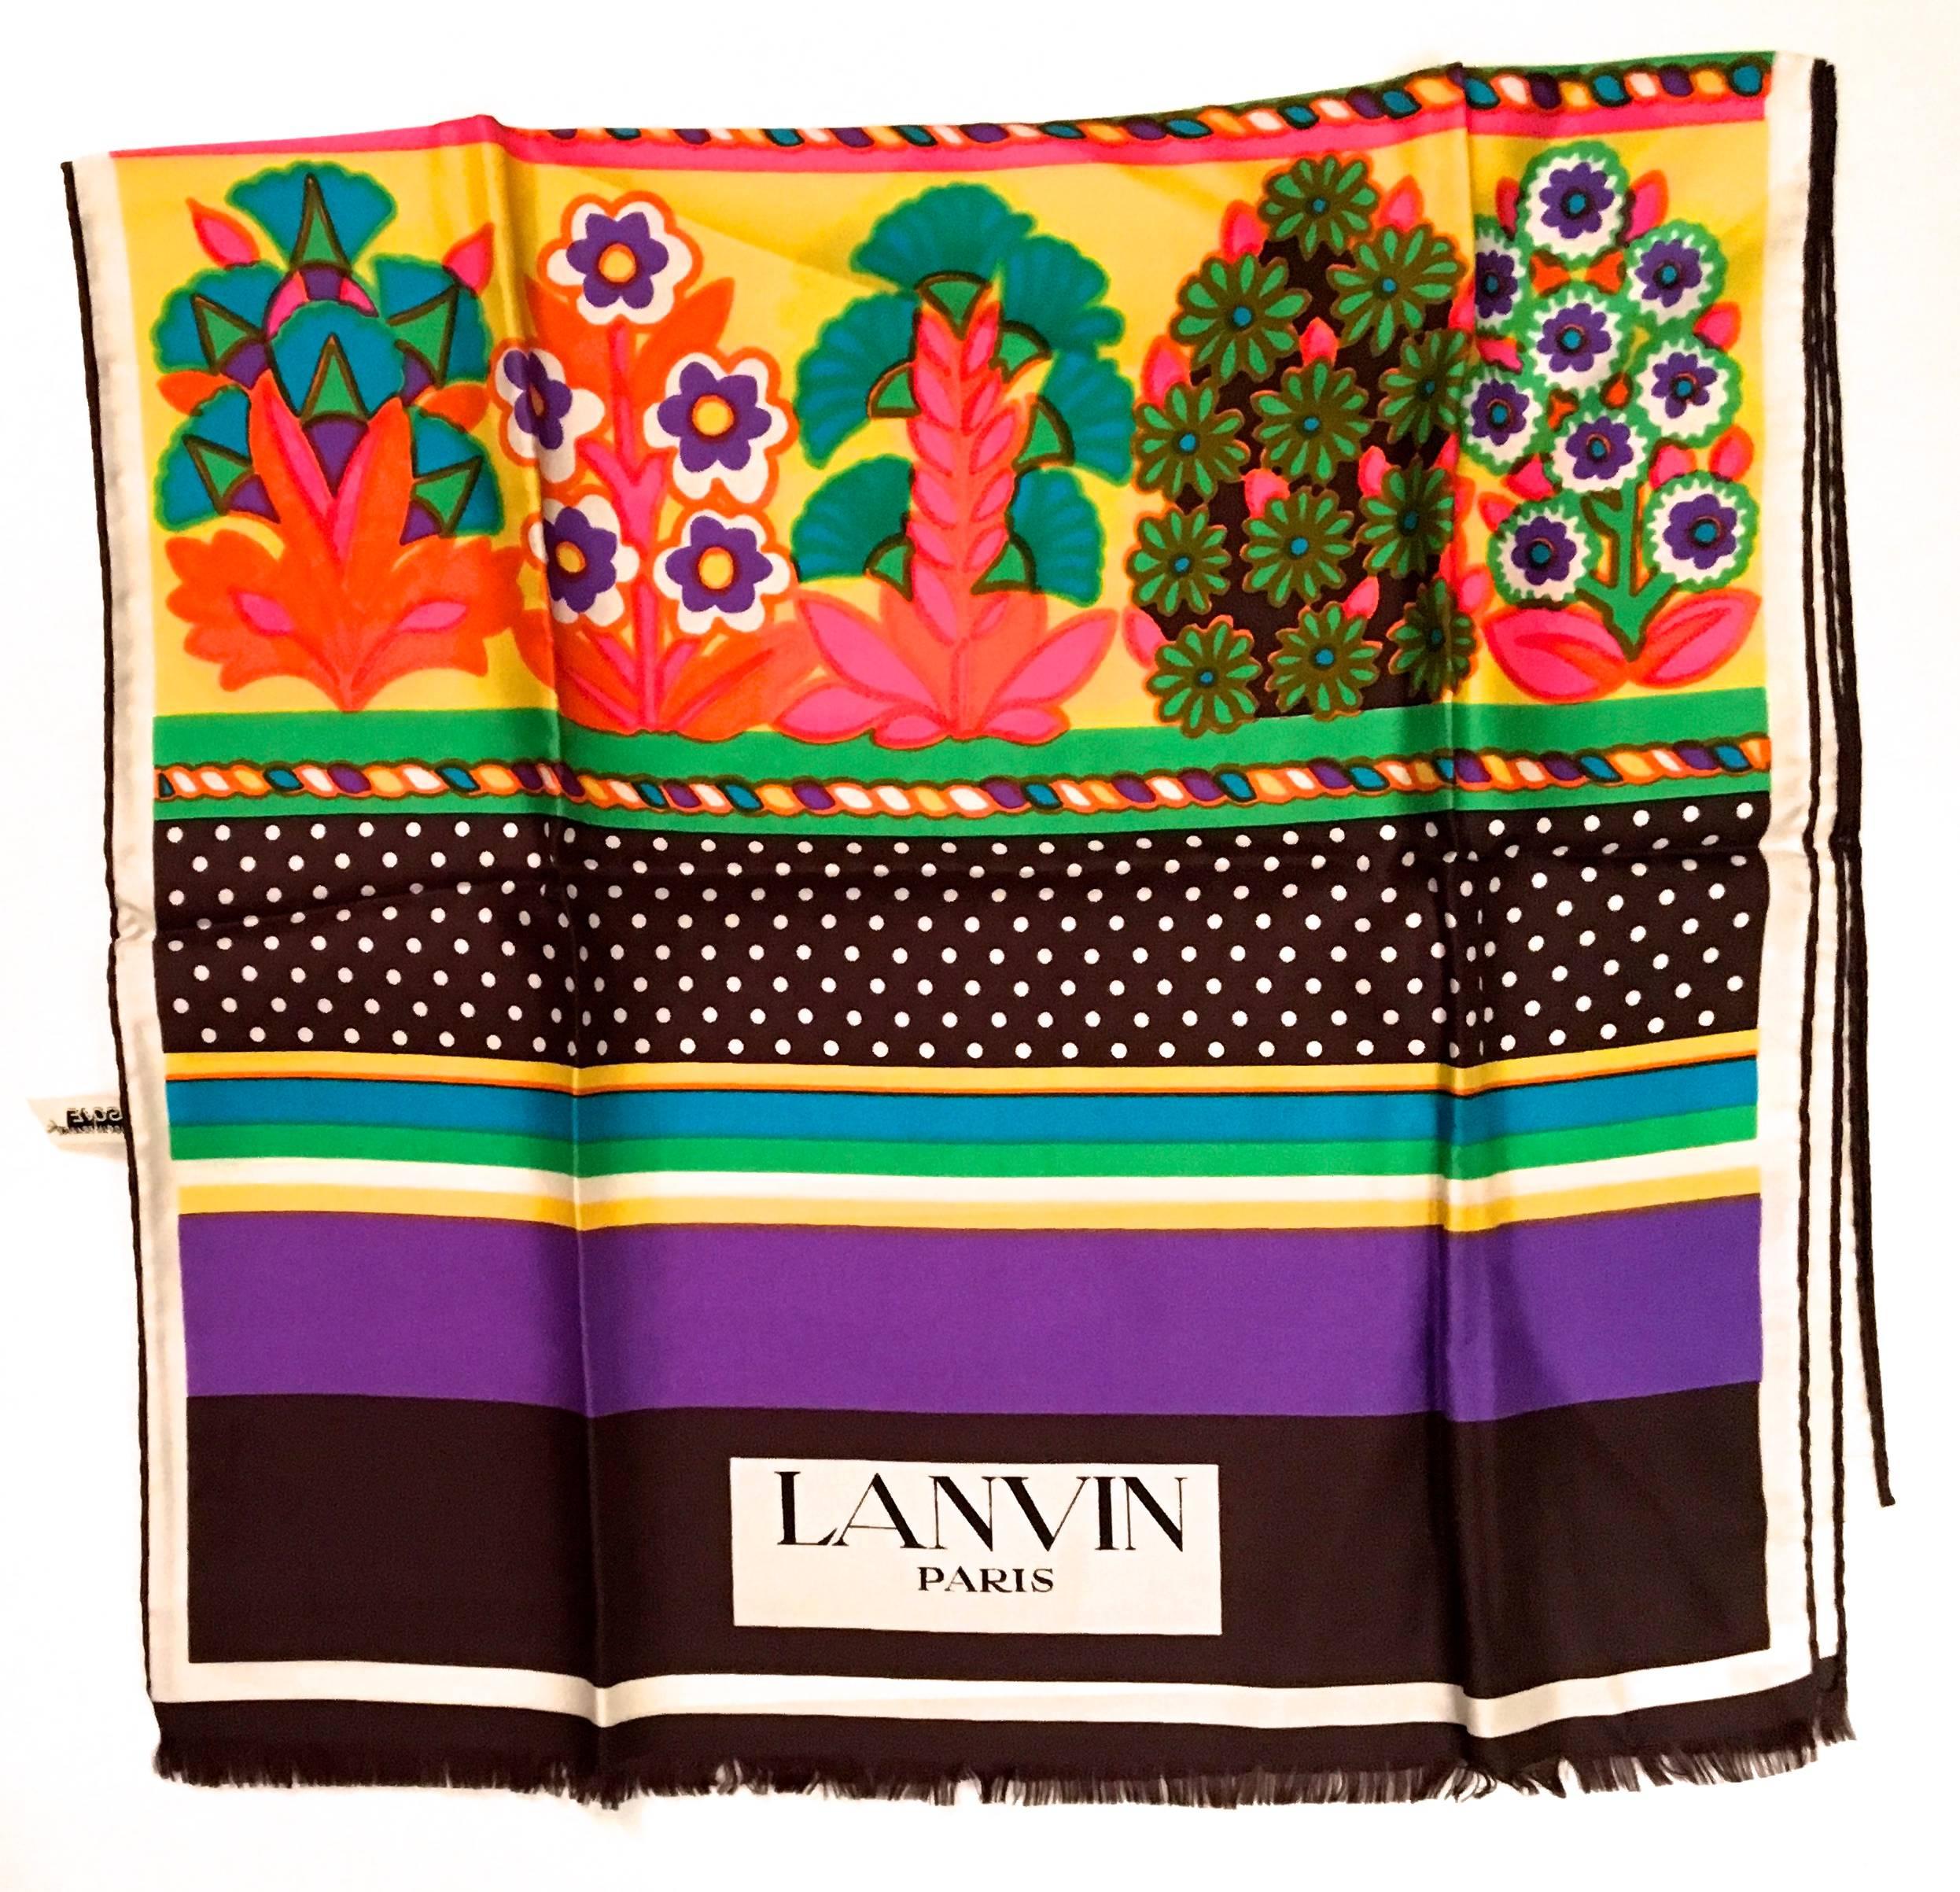 Presented here is a fabulous scarf from Lanvin Paris. This beautiful silk scarf is made from 100% silk. It is separated into different sections. Each section is a different colorful design. Every color of the rainbow is featured in the scarf’s